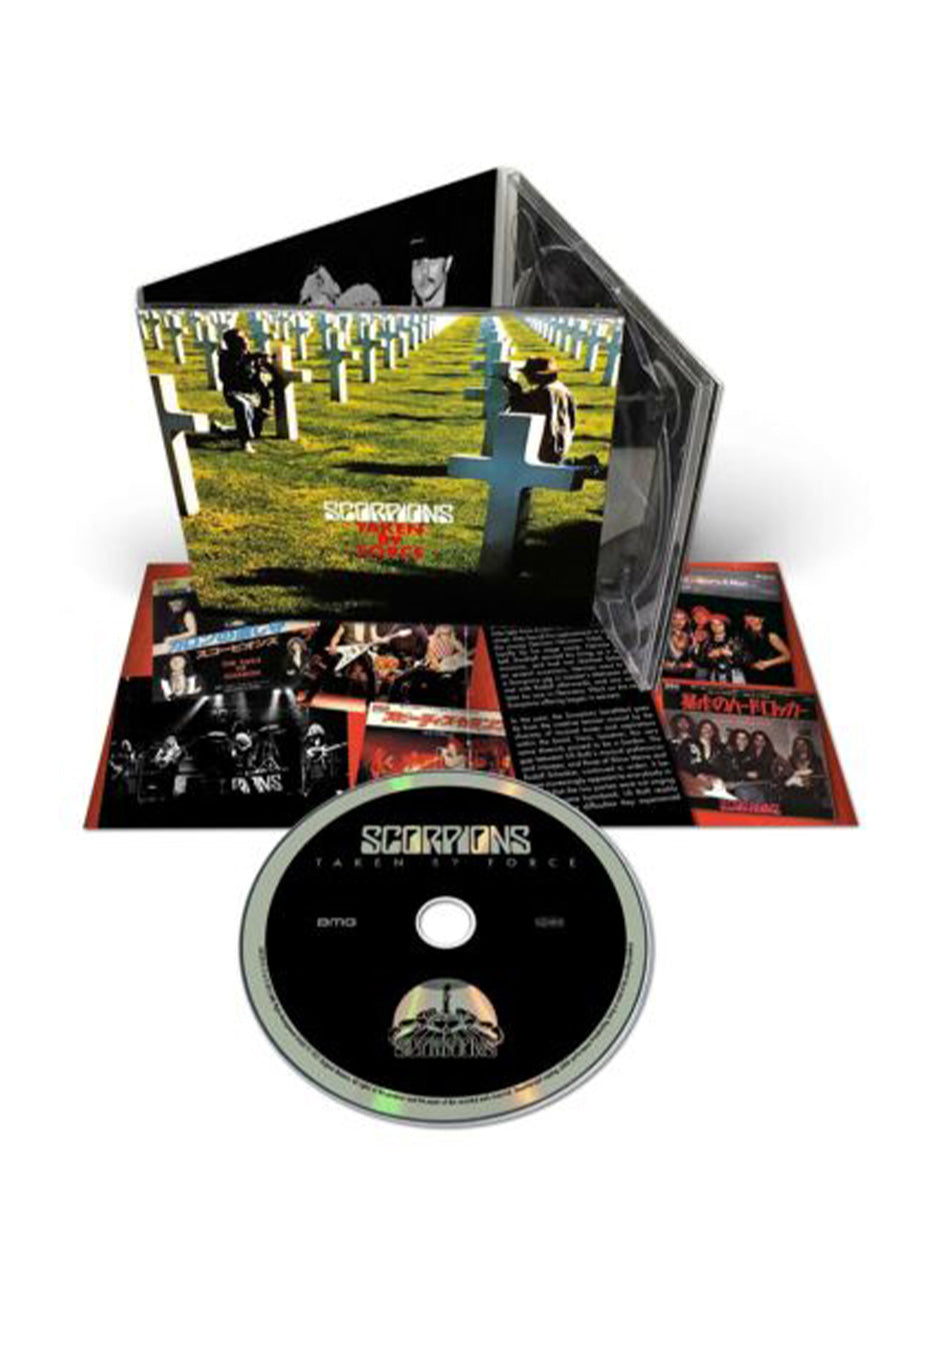 Scorpions - Taken By Force (50th Anniversary Deluxe Edition) - Digipak CD